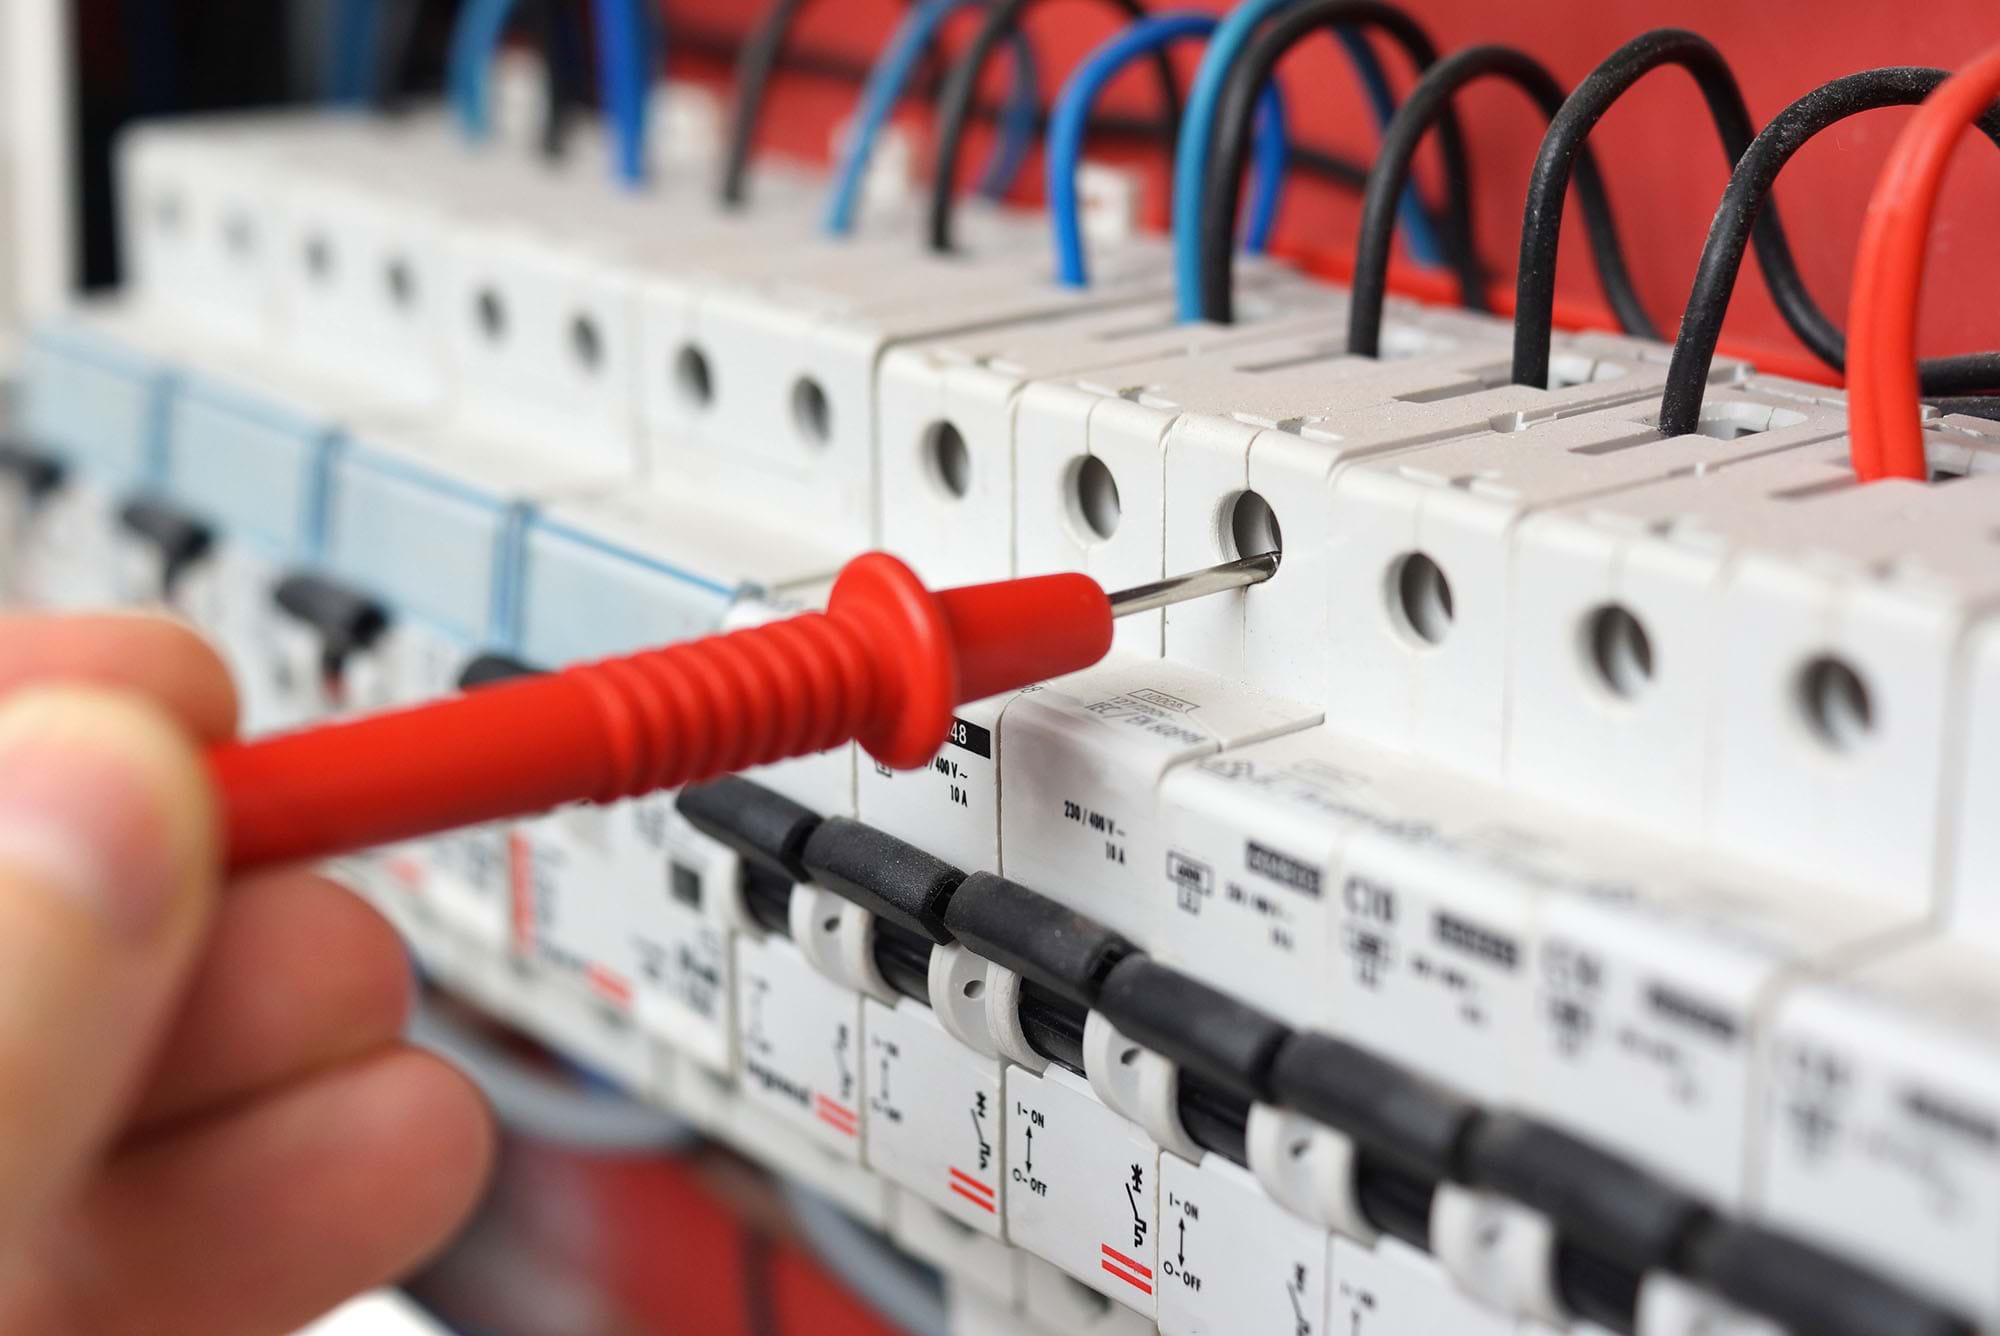 What are the common causes of electrical accidents at work?